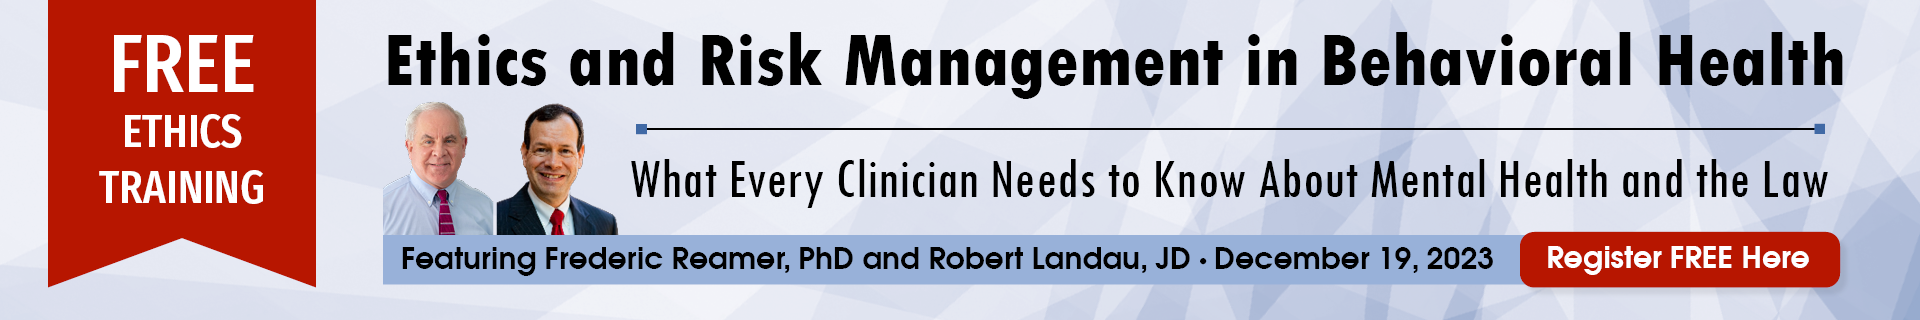 Ethics and Risk Management in Behavioral Health: What Every Clinician Needs to Know About Mental Health and the Law